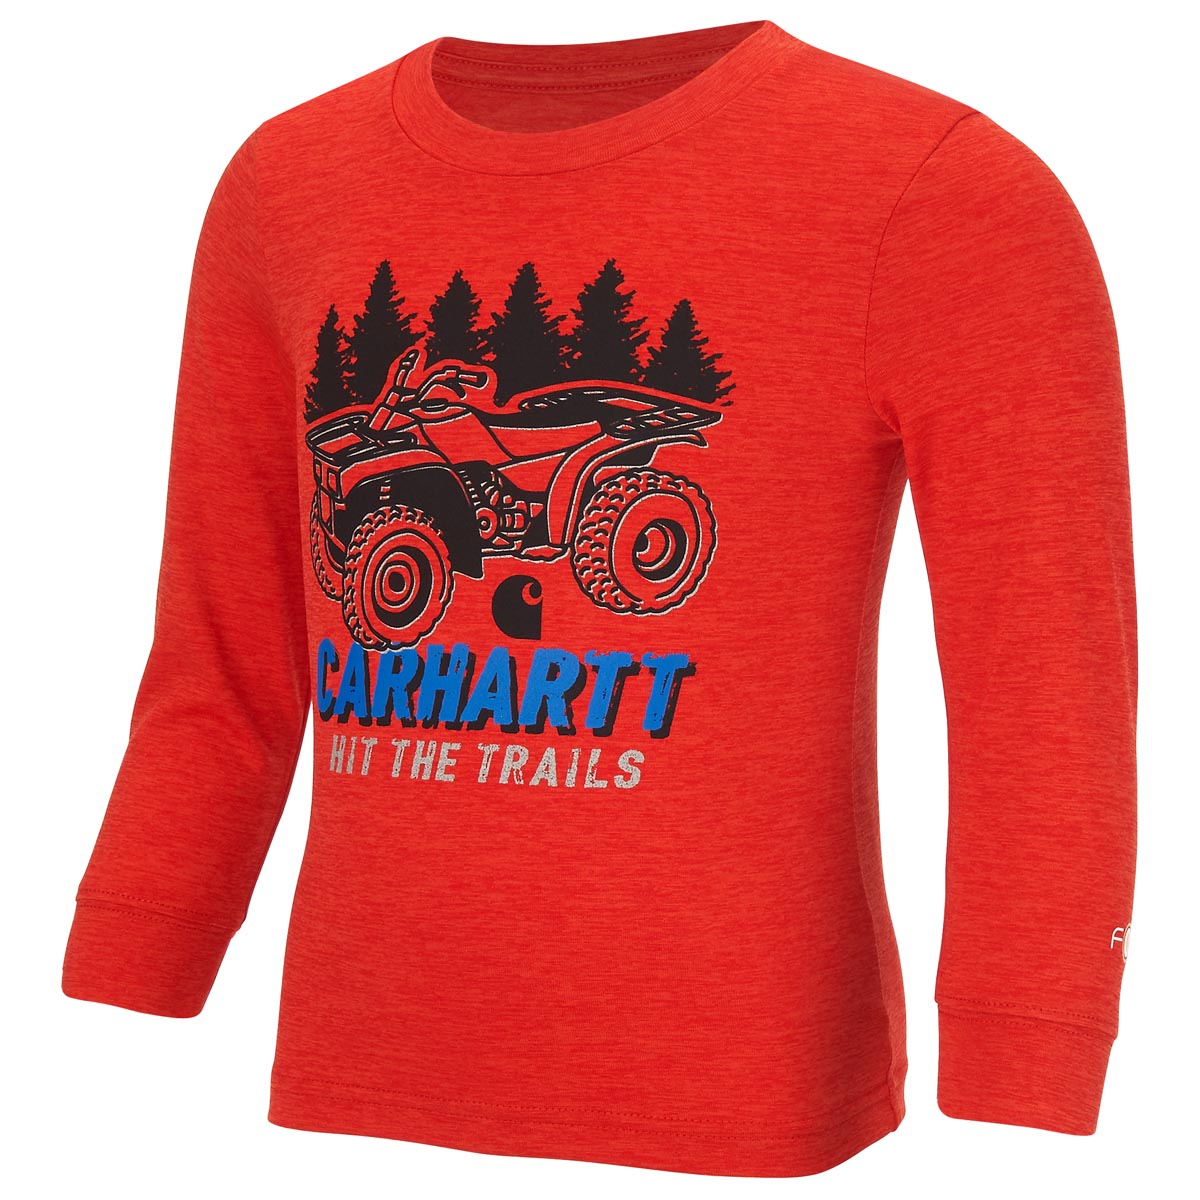 Carhartt Infant and Toddler Boys' Hit The Trails Force Logo Tee